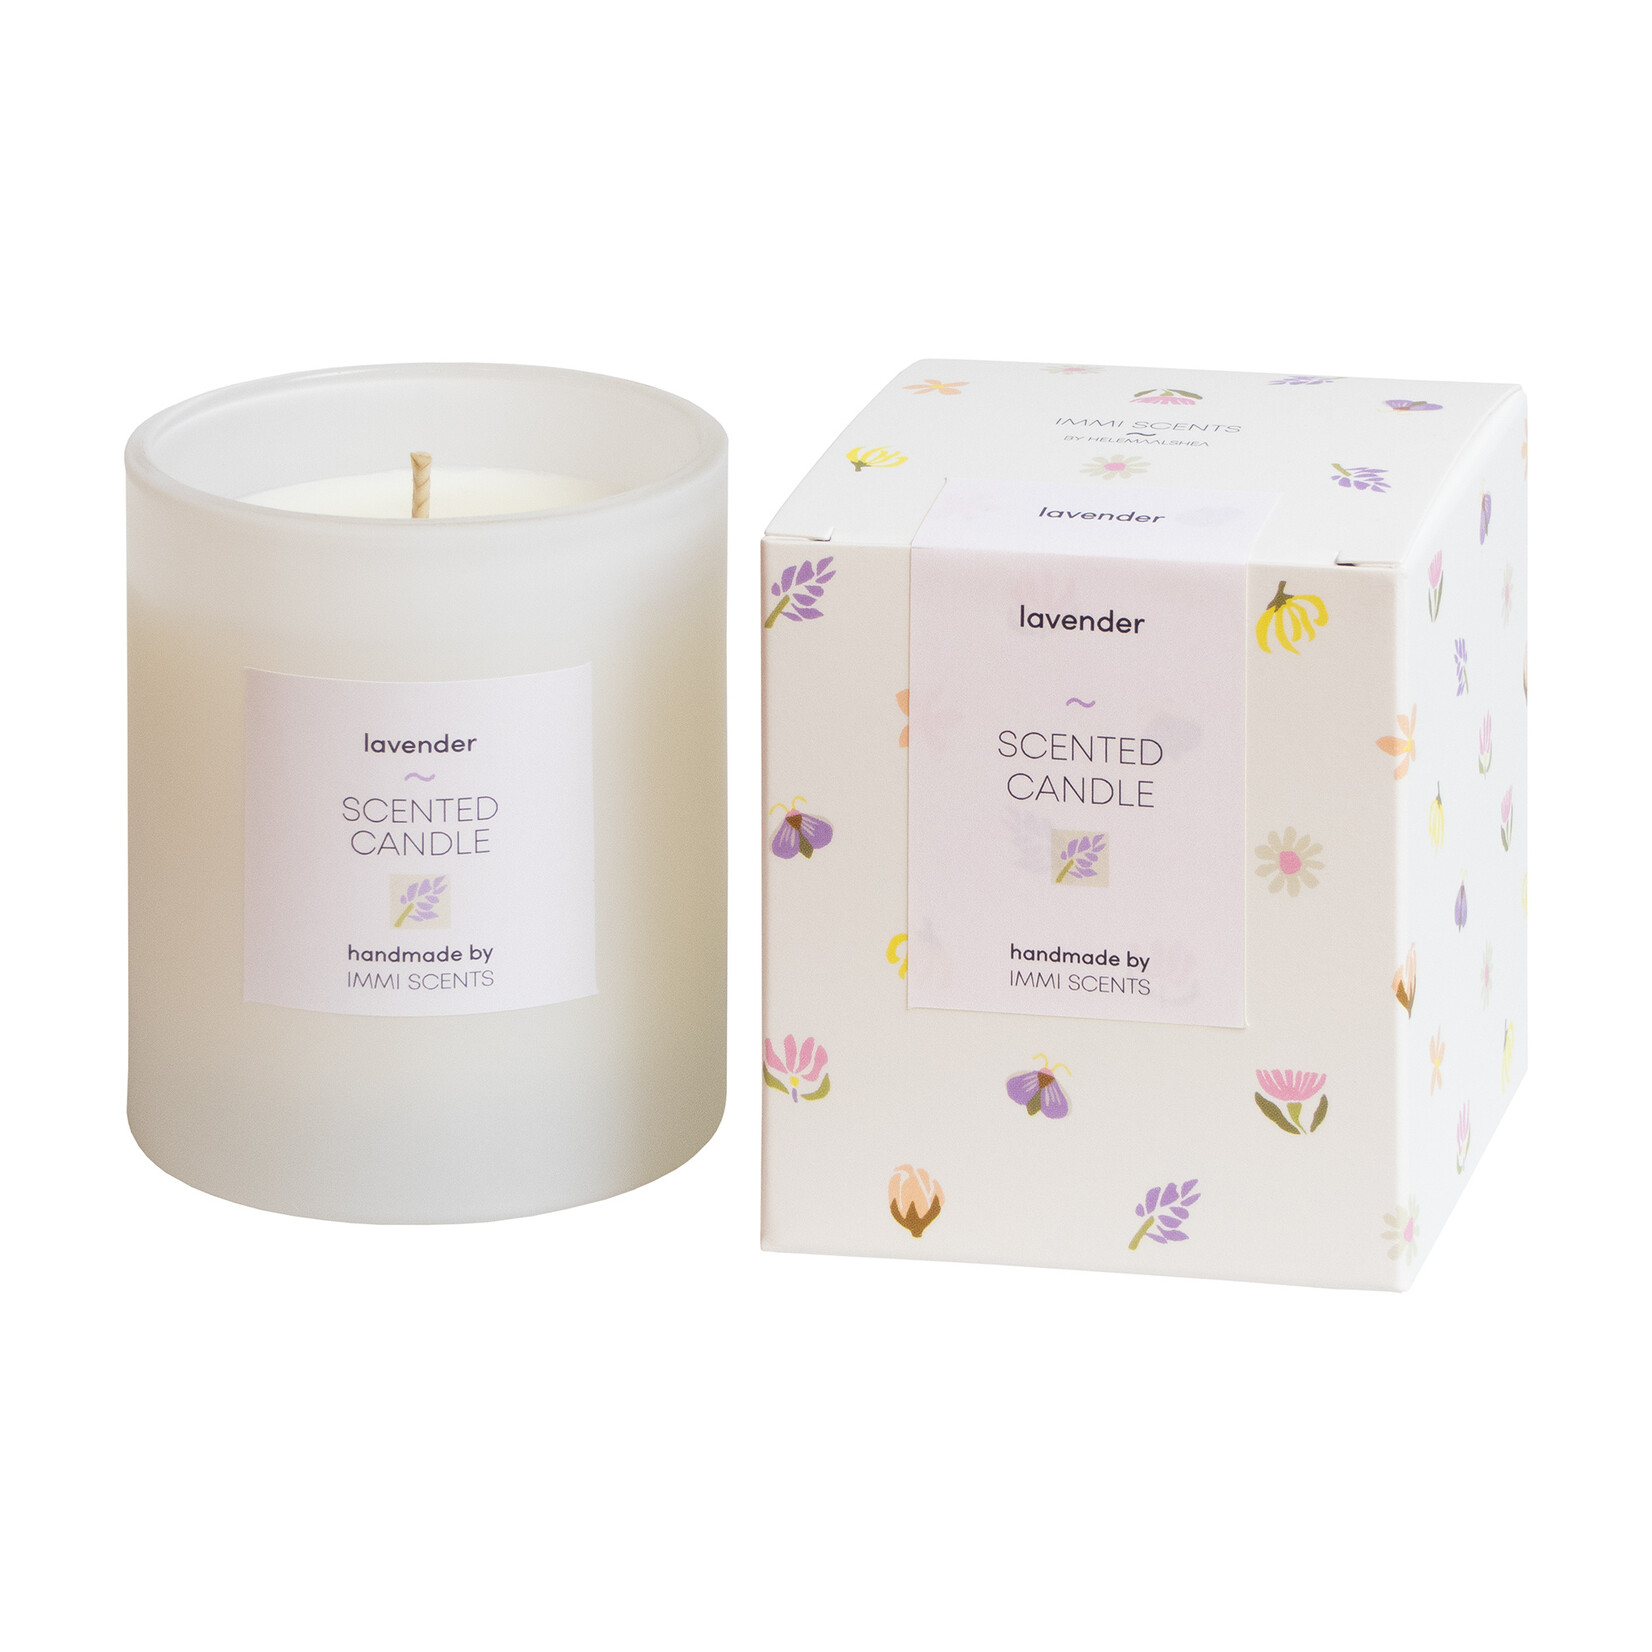 Scented candle - Lavender - white